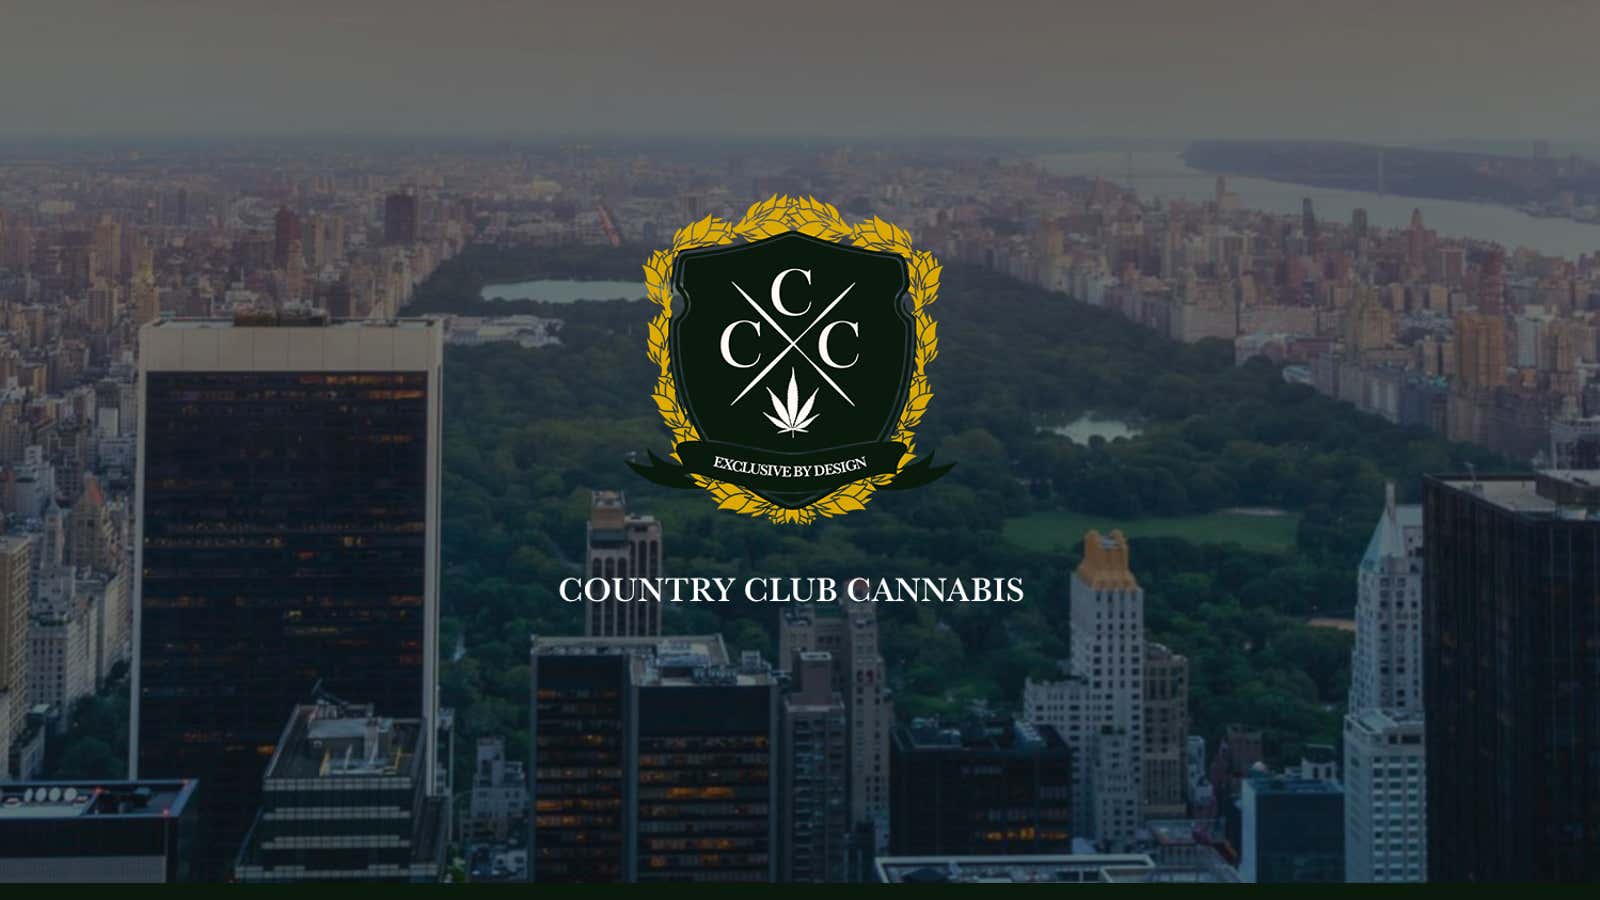 The homepage of Country Club Cannabis.